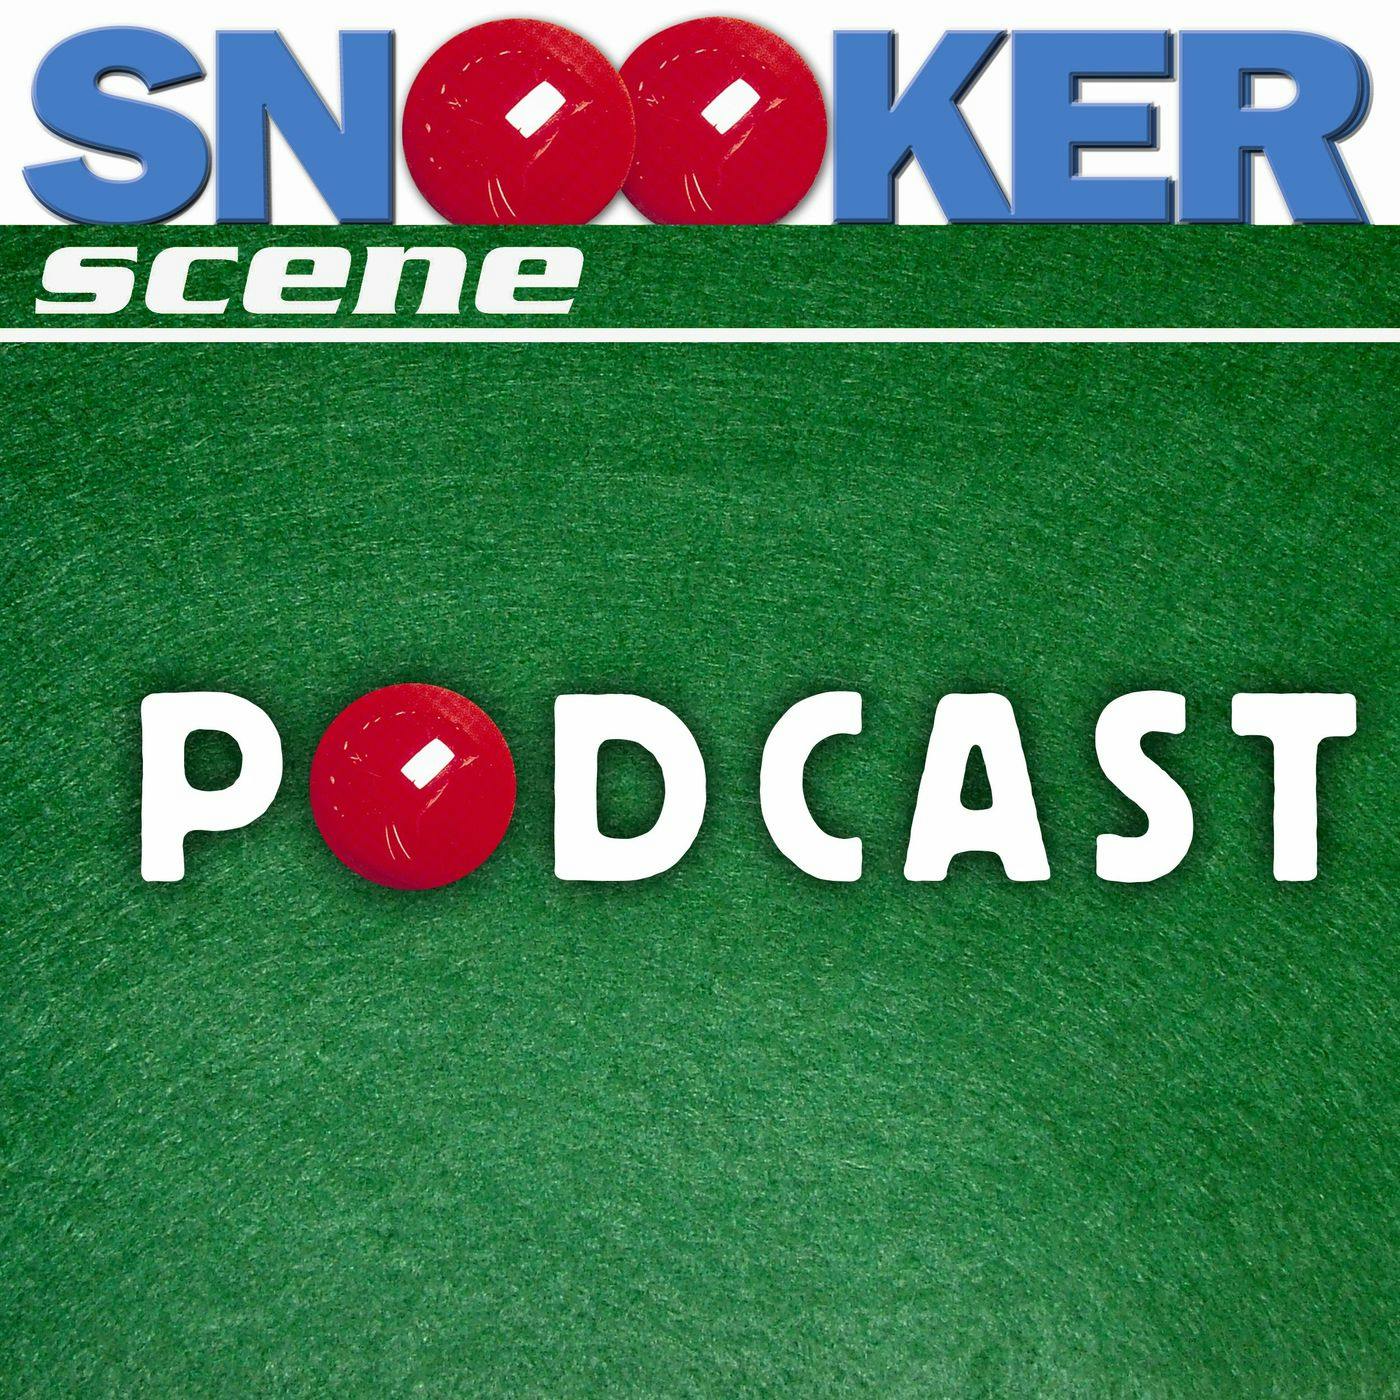 Snooker Scene Podcast episode 191 - Not-Special: Part 2